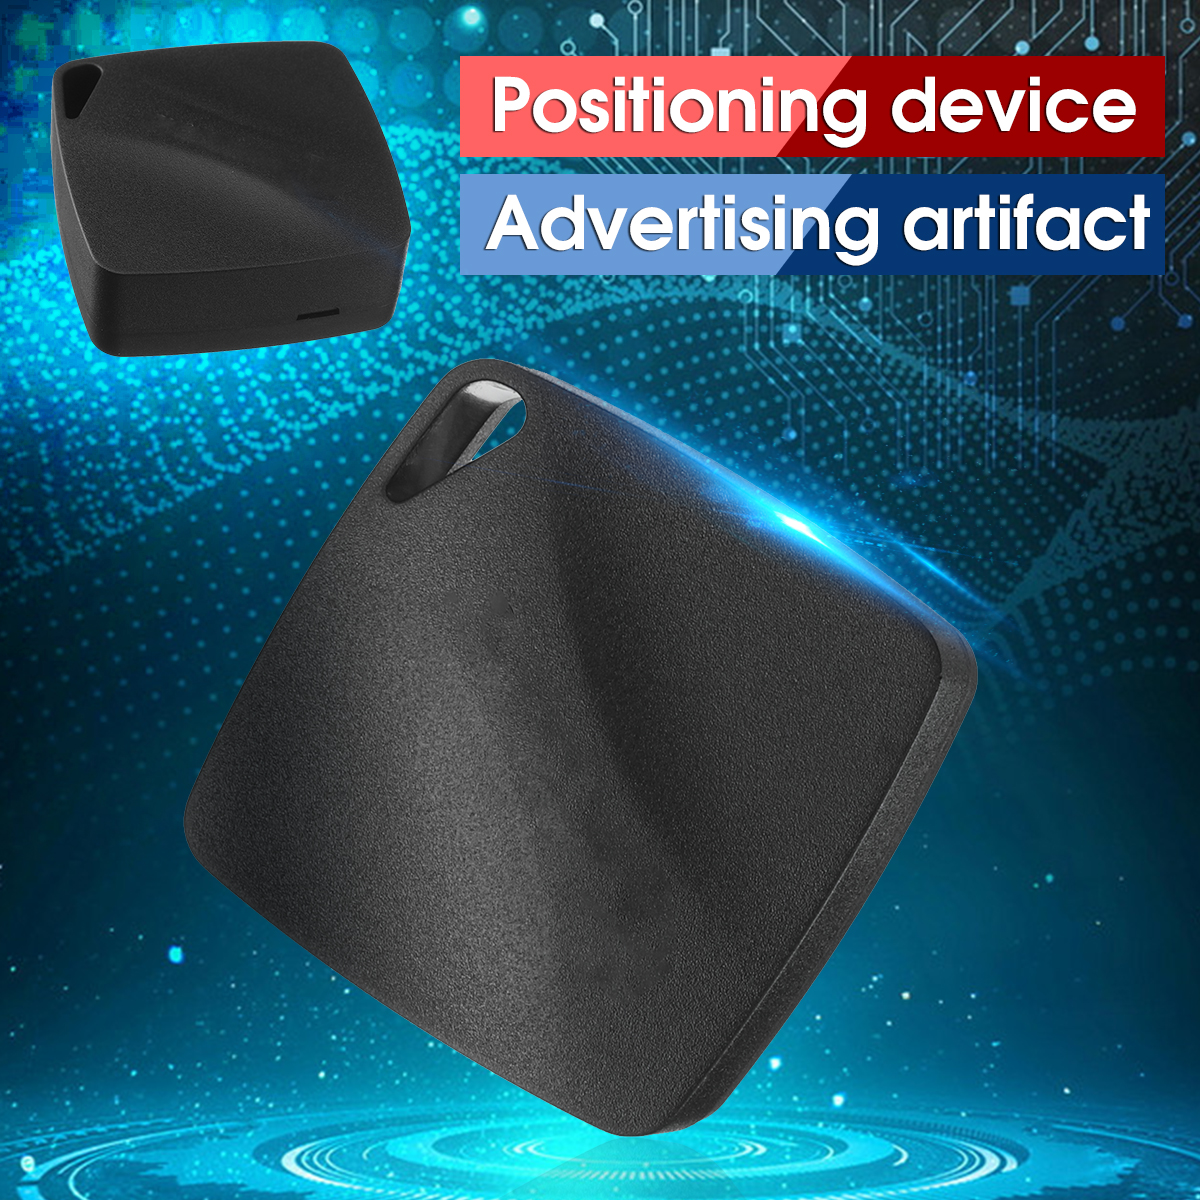 Square-Waterproof-Black-Tracking-Device-Base-Station-Positioning-Location-1725758-1